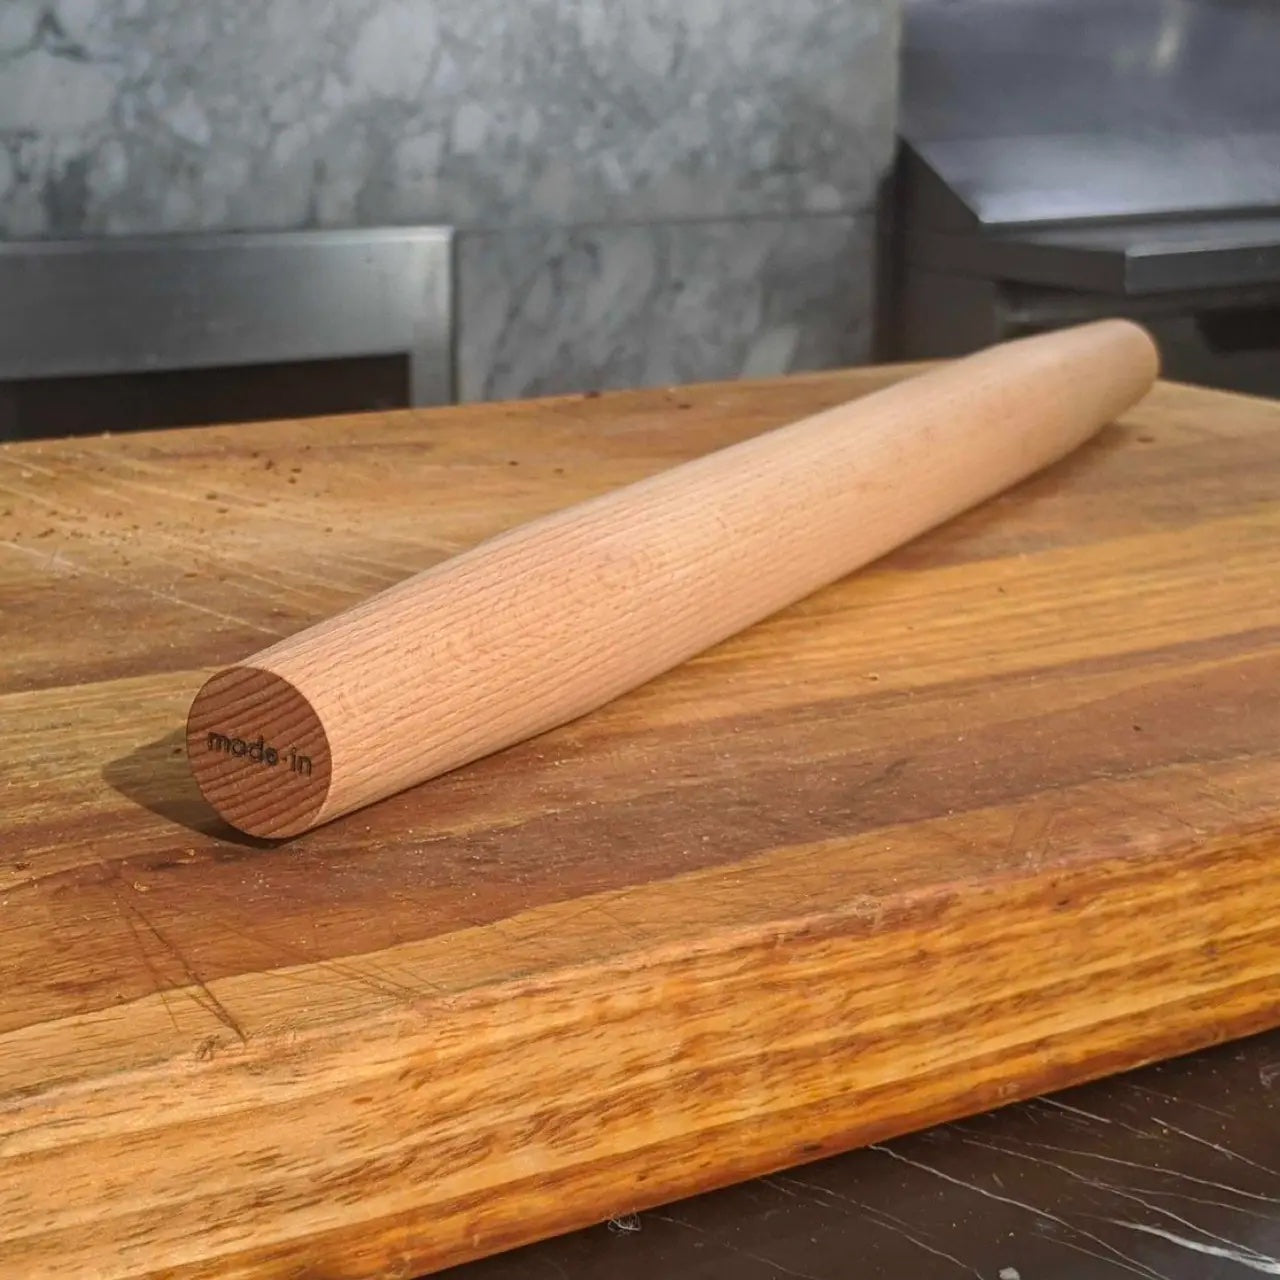 FRENCH ROLLING PIN